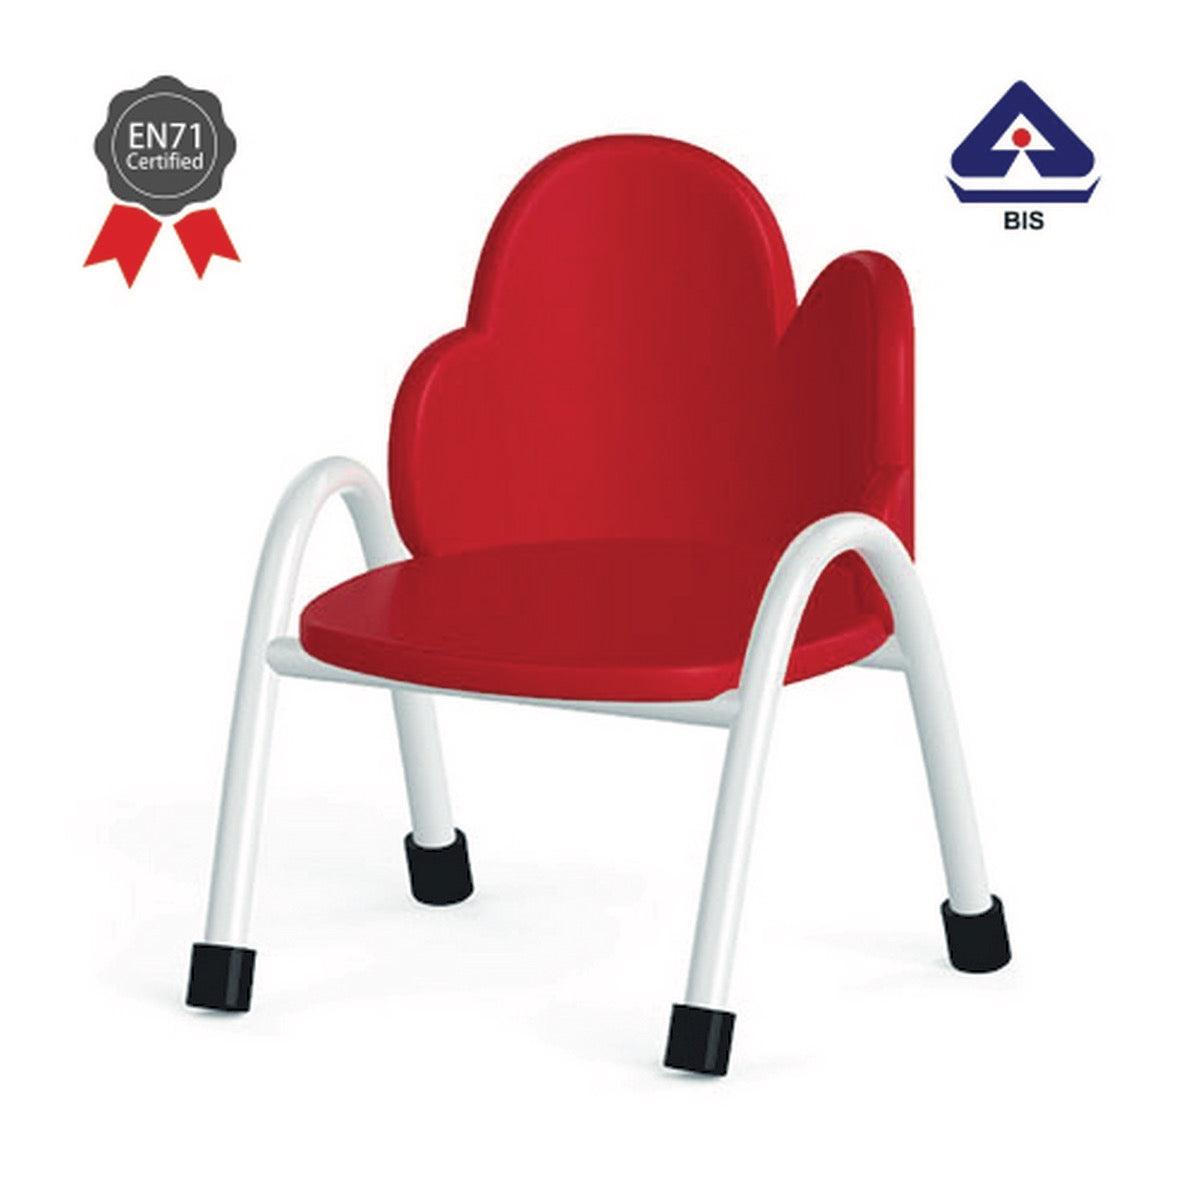 Ok Play Cloud Chair, Study Chair, Sturdy And Durable Chair, Plastic Chair, Perfect For Home, Creches And School, Red, 5 to 10 Years, Height 12 Inches